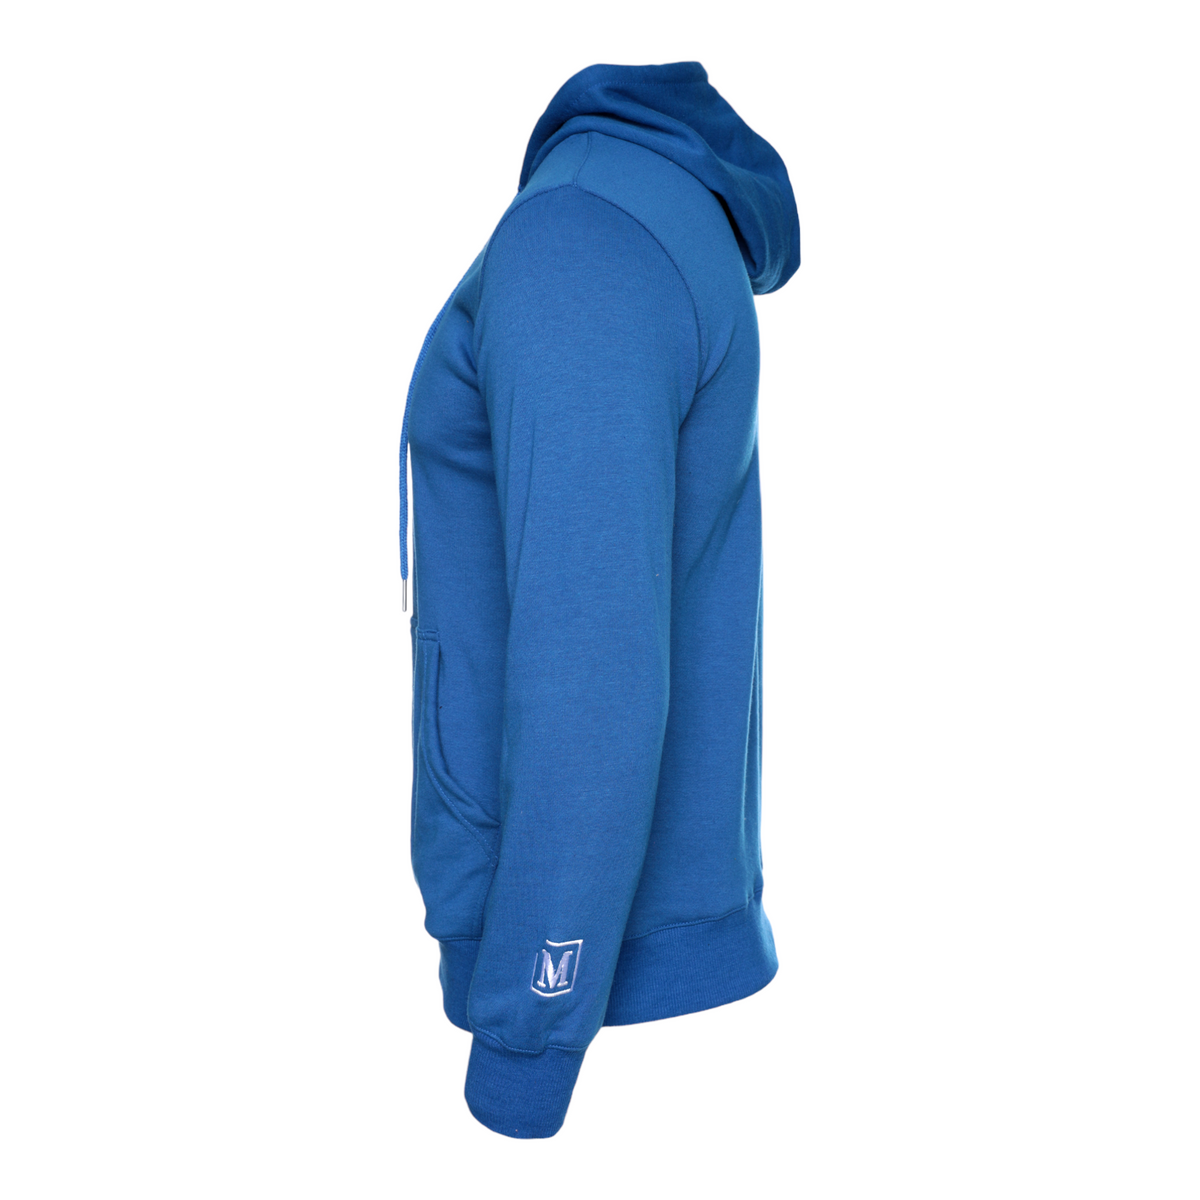 MDB Couture Men's French Terry Hoodie - Color